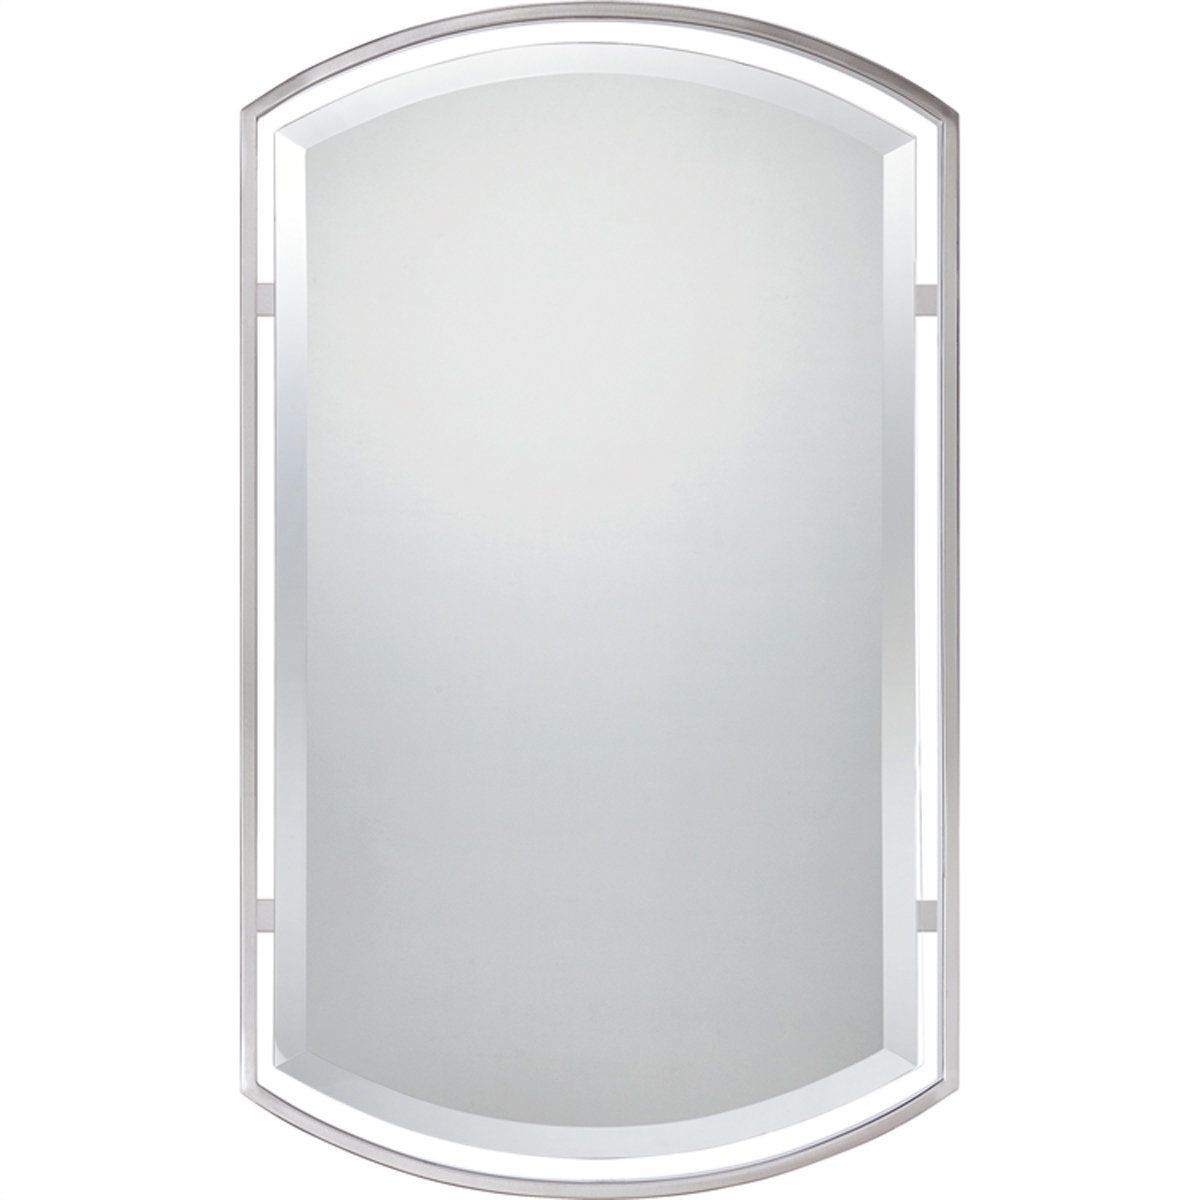 Floating Frame Rounded Rectangular Mirror In 2021 | Brushed Nickel For Oxidized Nickel Wall Mirrors (View 5 of 15)